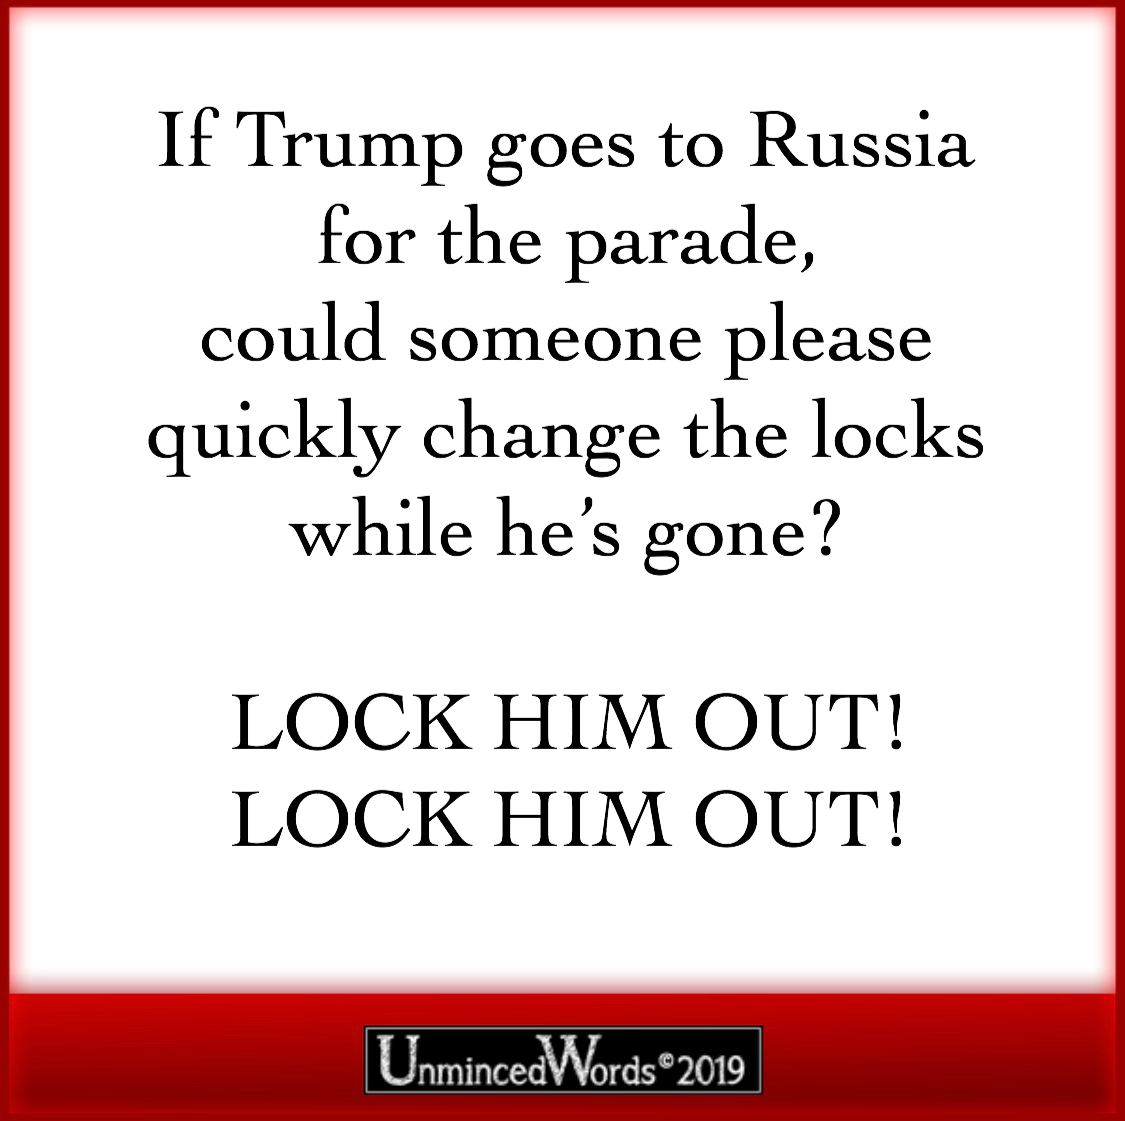 Lock him out! Lock him out!